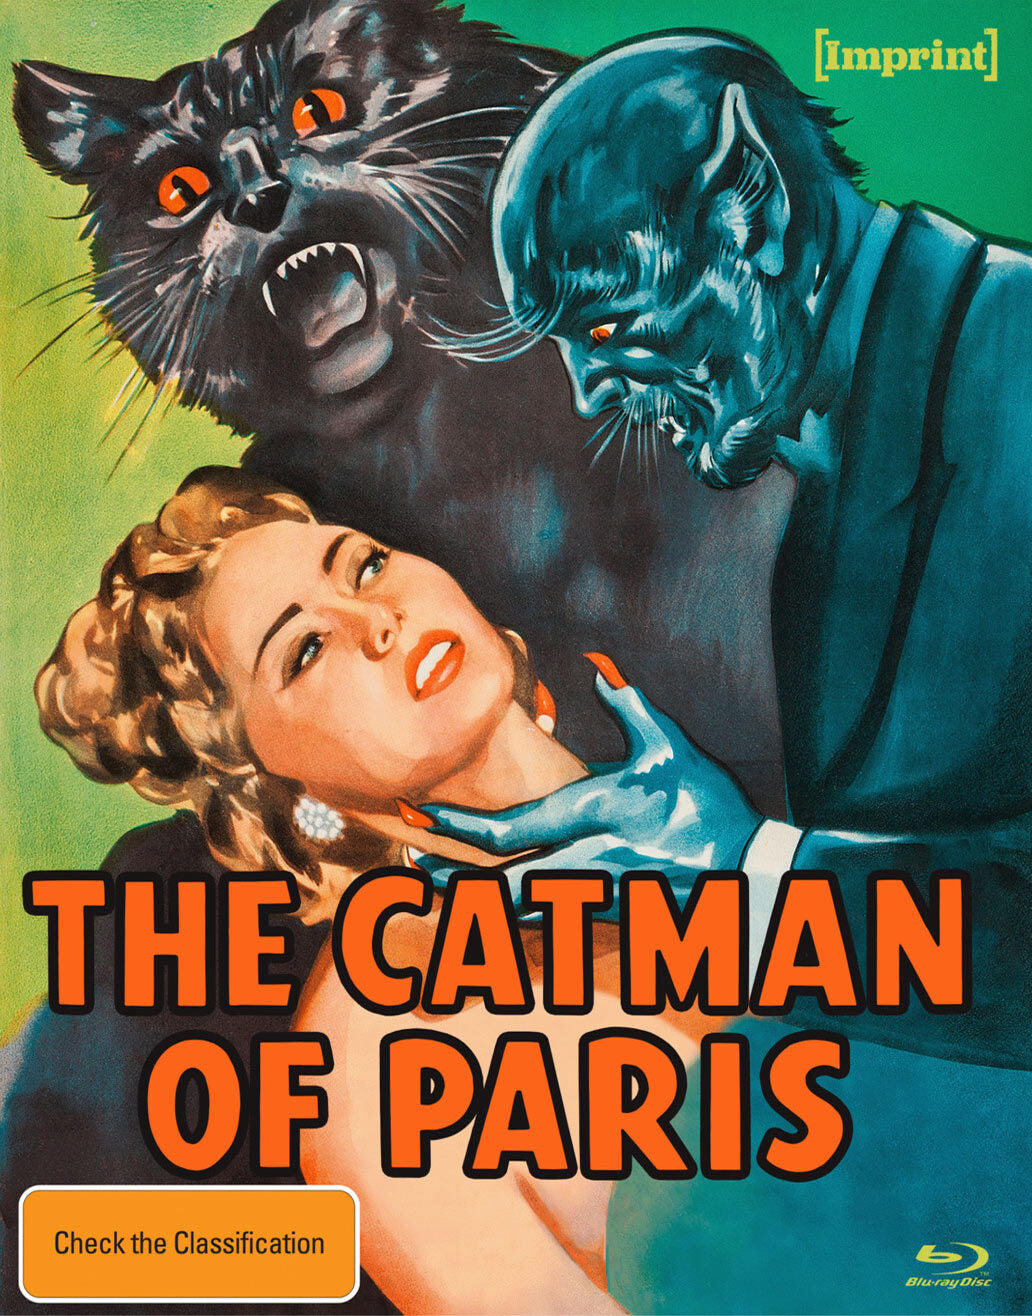 THE CATMAN OF PARIS (REGION FREE IMPORT - LIMITED EDITION) BLU-RAY